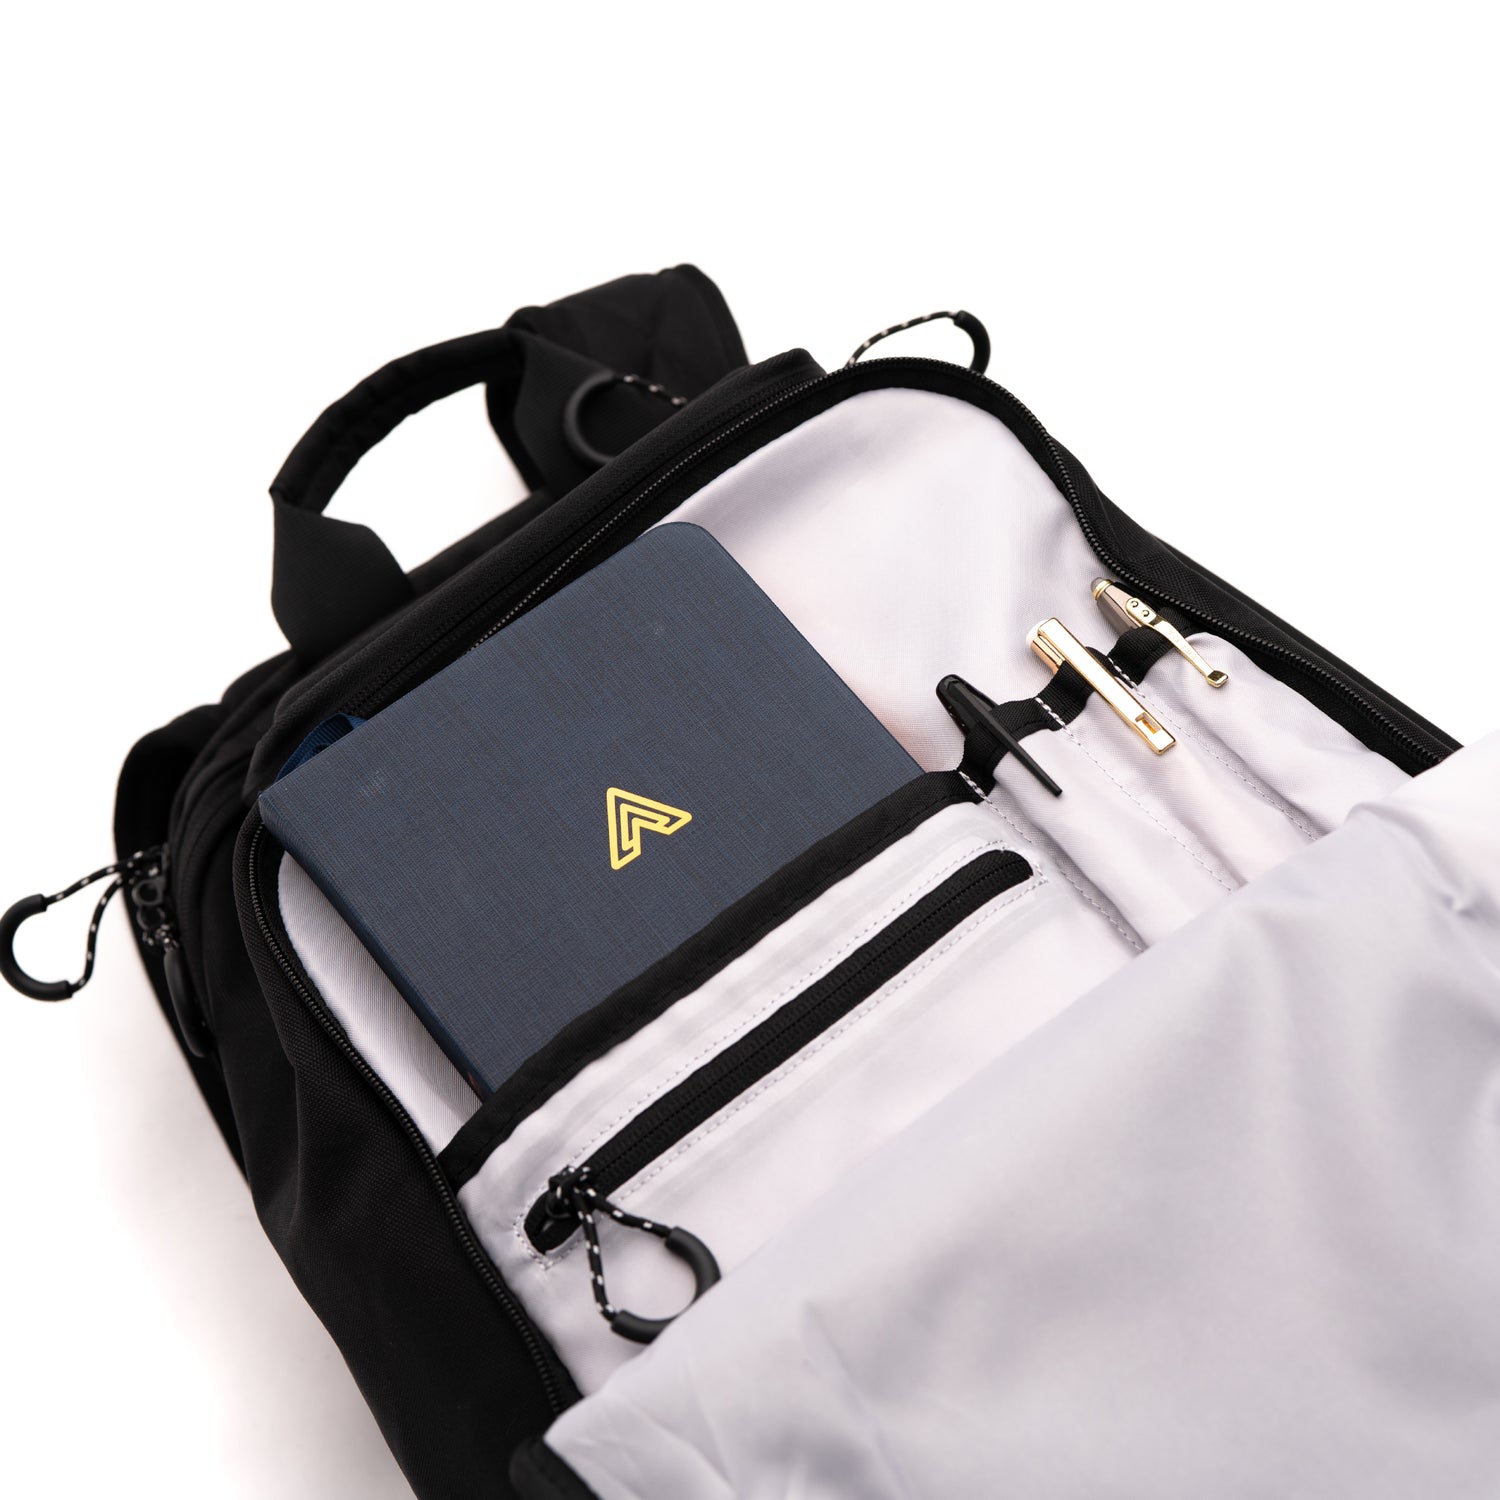 The front pocket of the EDC Elite Backpack is perfect for travel and carrying items like a passport and pens